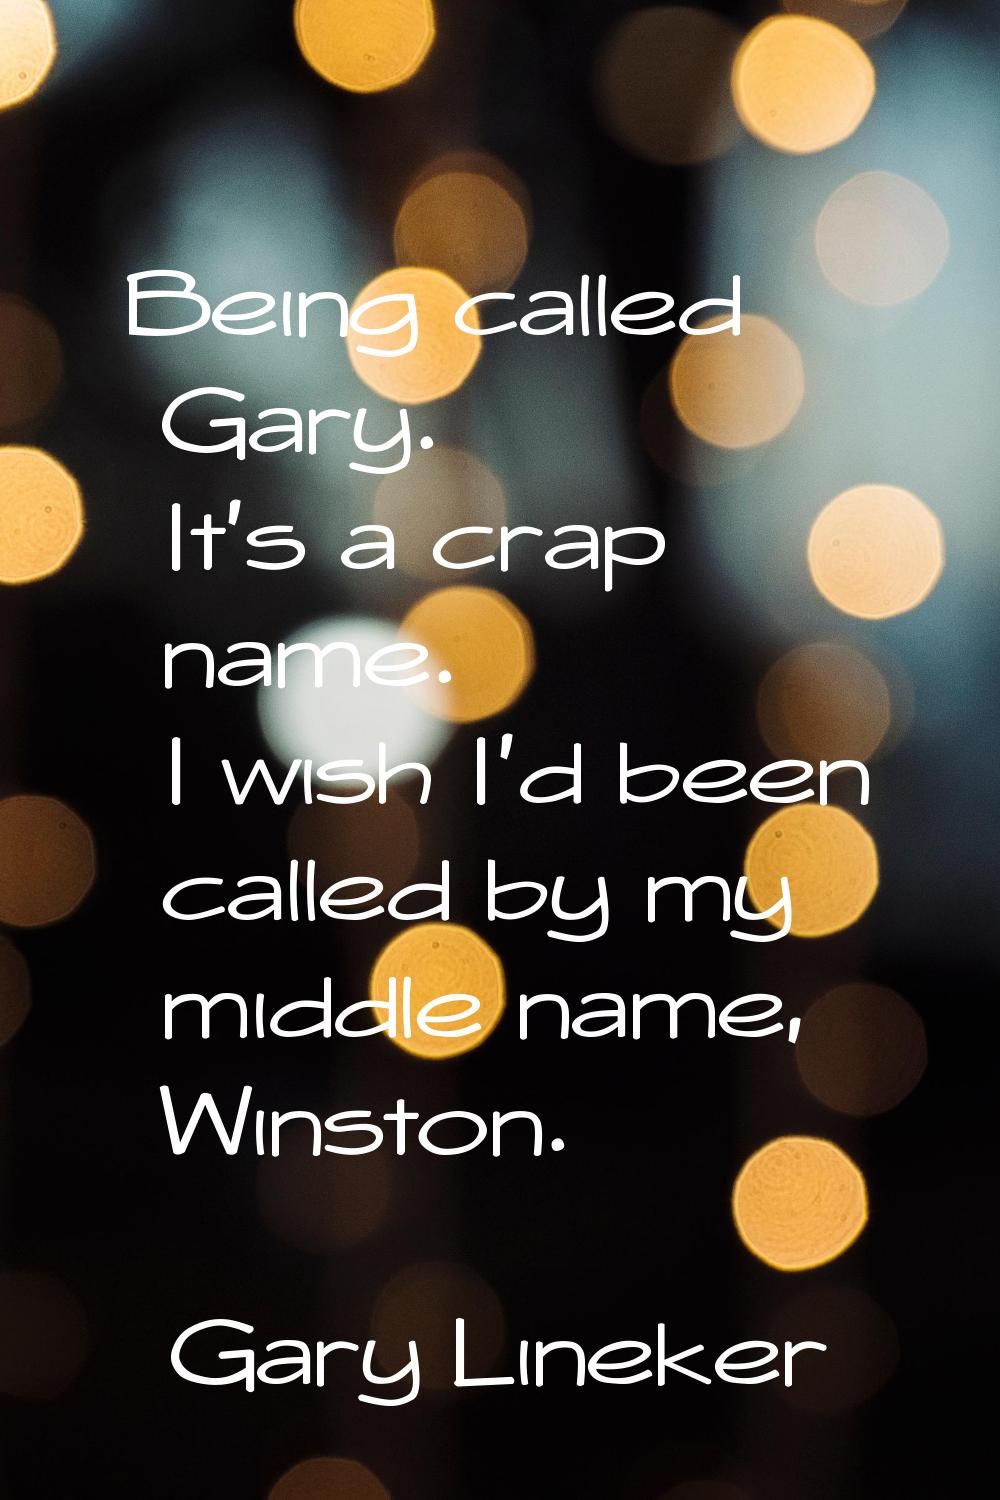 Being called Gary. It's a crap name. I wish I'd been called by my middle name, Winston.